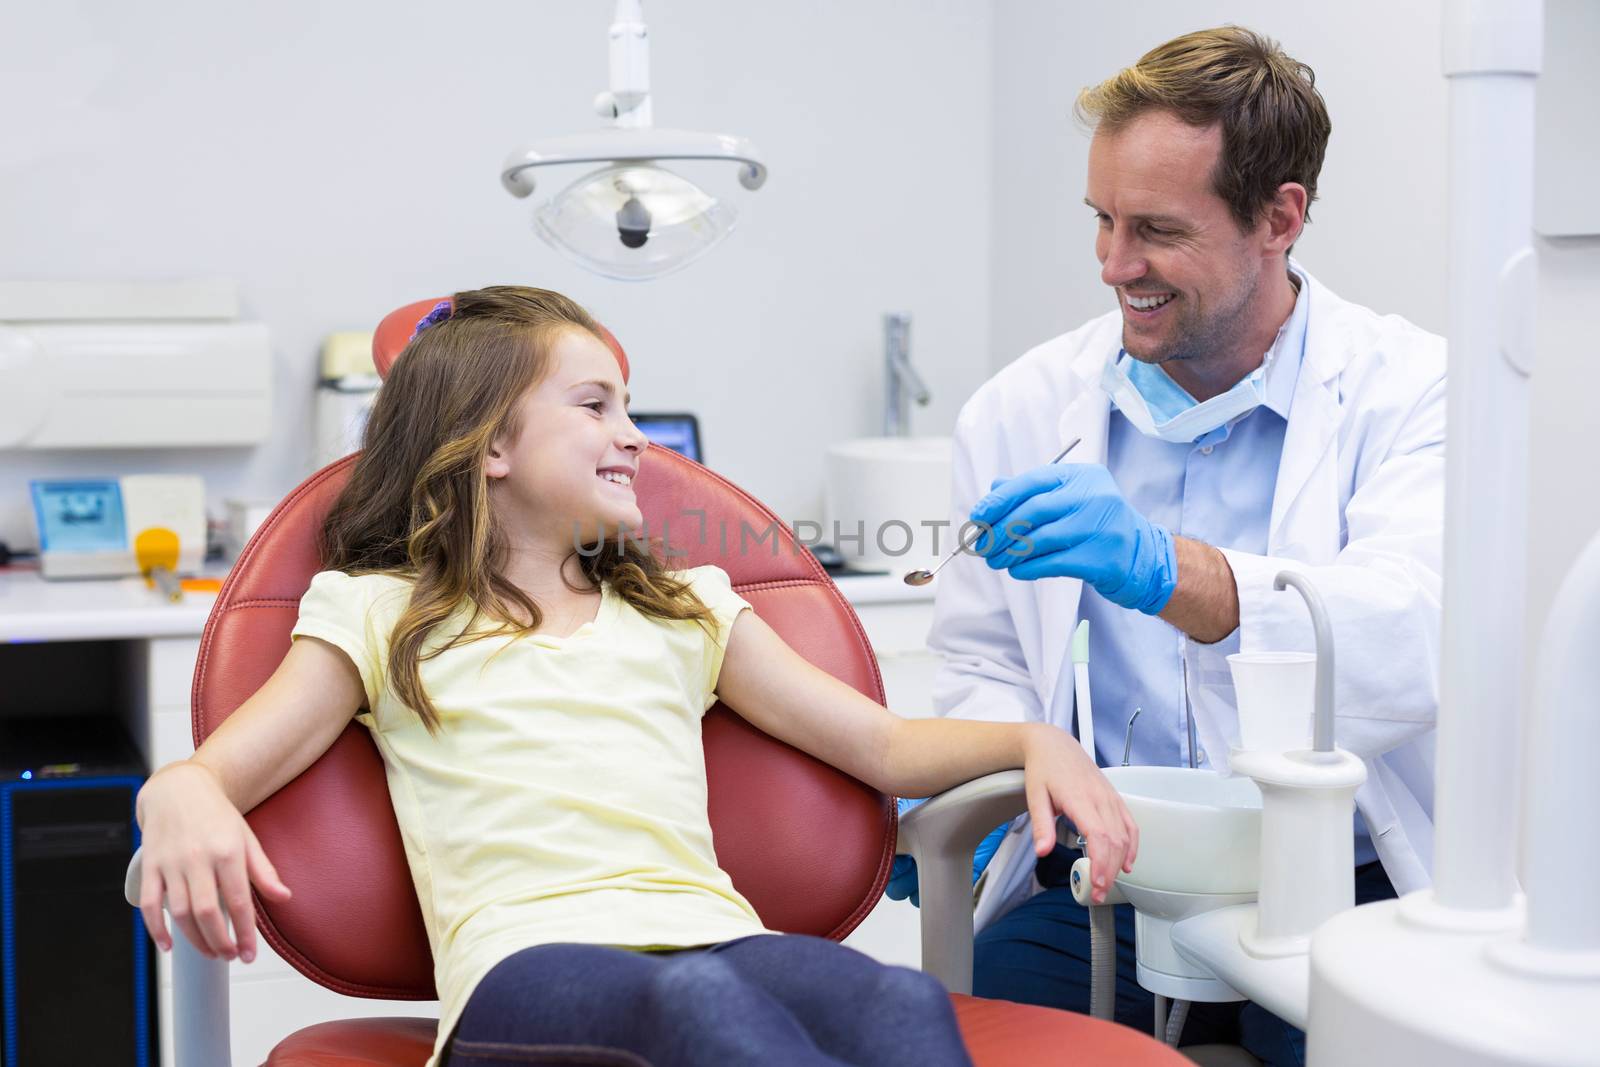 Smiling dentist talking to young patient in dental clinic